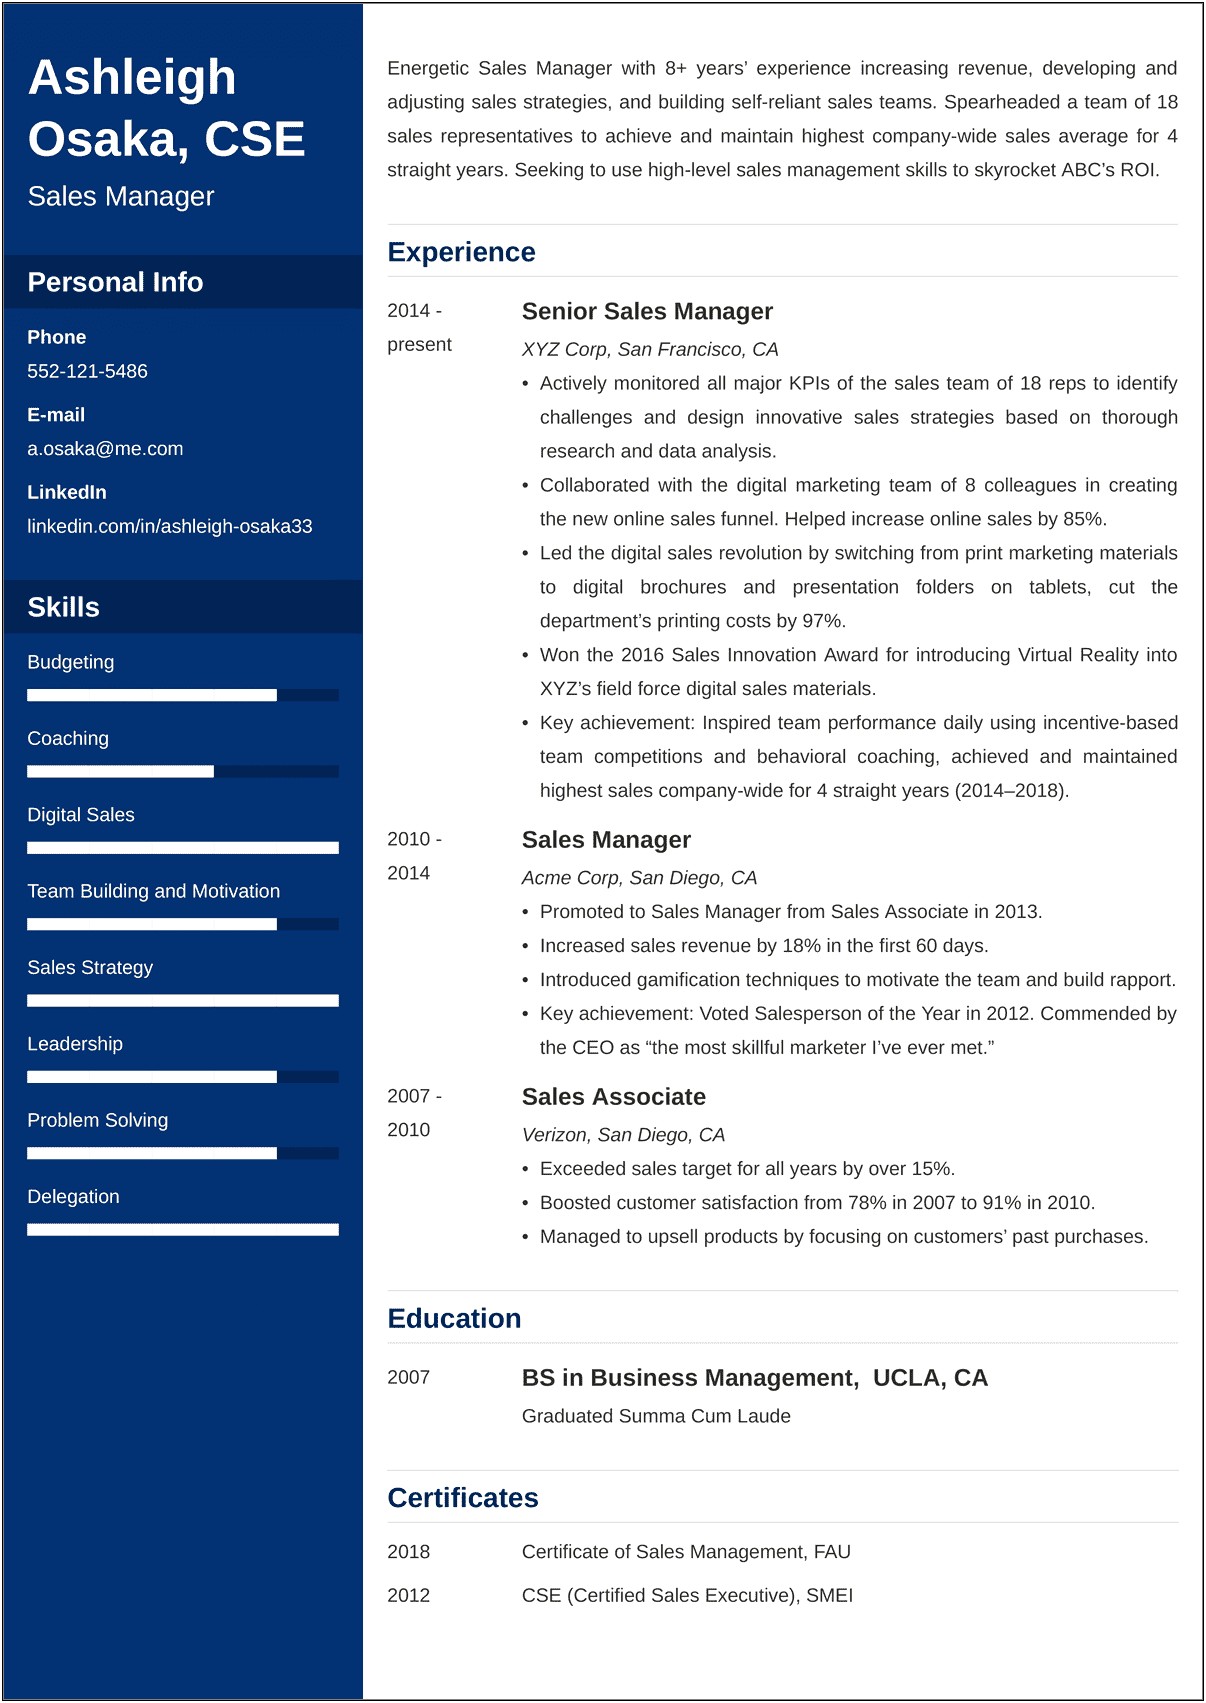 Example Of Resume Objective For Manager Position